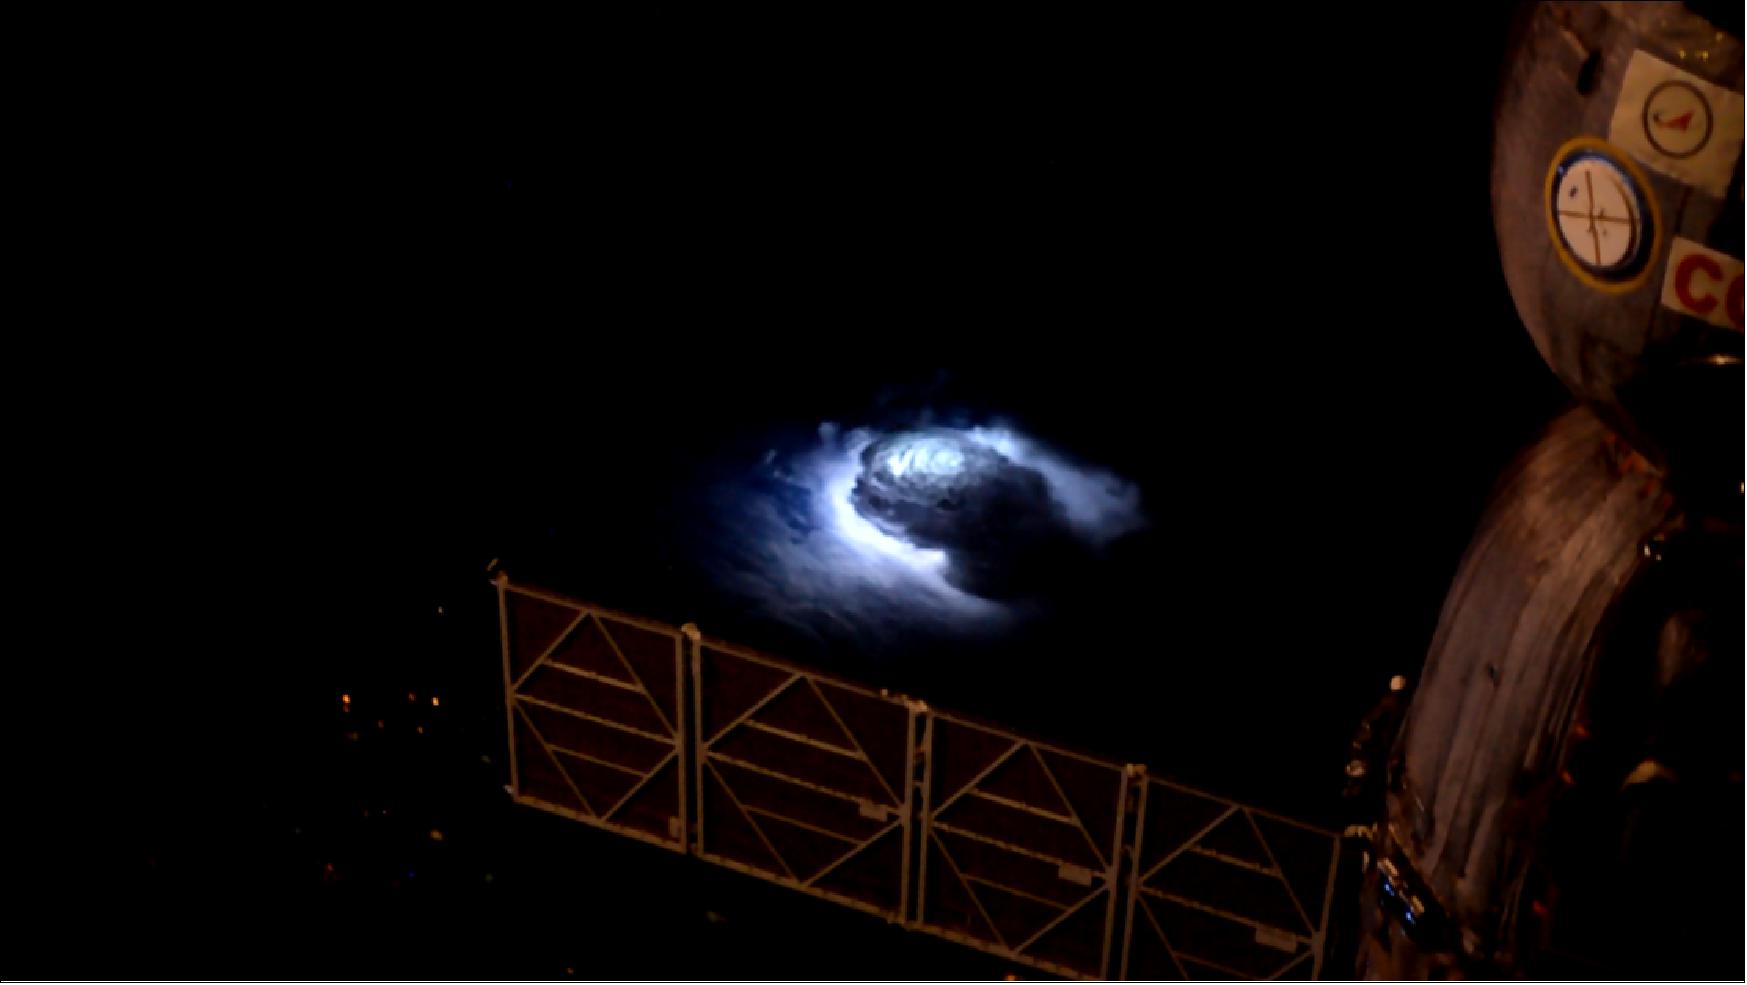 Figure 4: For years, their existence has been debated: elusive electrical discharges in the upper atmosphere that sport names such as red sprites, blue jets, pixies and elves. Reported by pilots, they are difficult to study as they occur above thunderstorms. ESA astronaut Andreas Mogensen on the International Space Station in 2015 was asked to take pictures over thunderstorms with the most sensitive camera on the orbiting outpost to look for these brief features (image credit: ESA/NASA) 15)